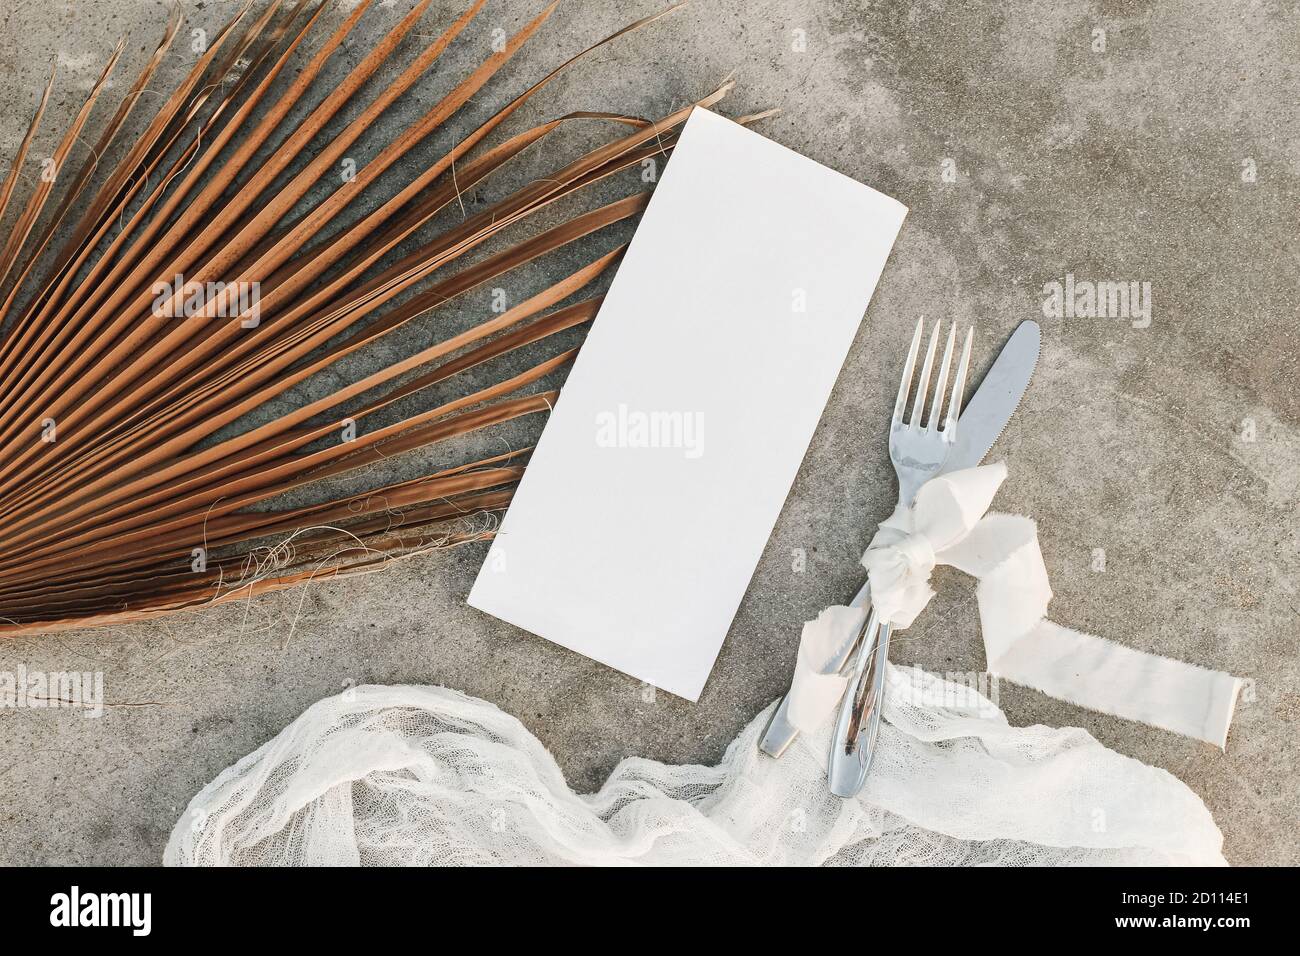 Tropical wedding ry still life. Closeup of blank menu card mock-up. Dry palm leaf, silver cutlery and muslin runner on grunge beige concrete Stock Photo